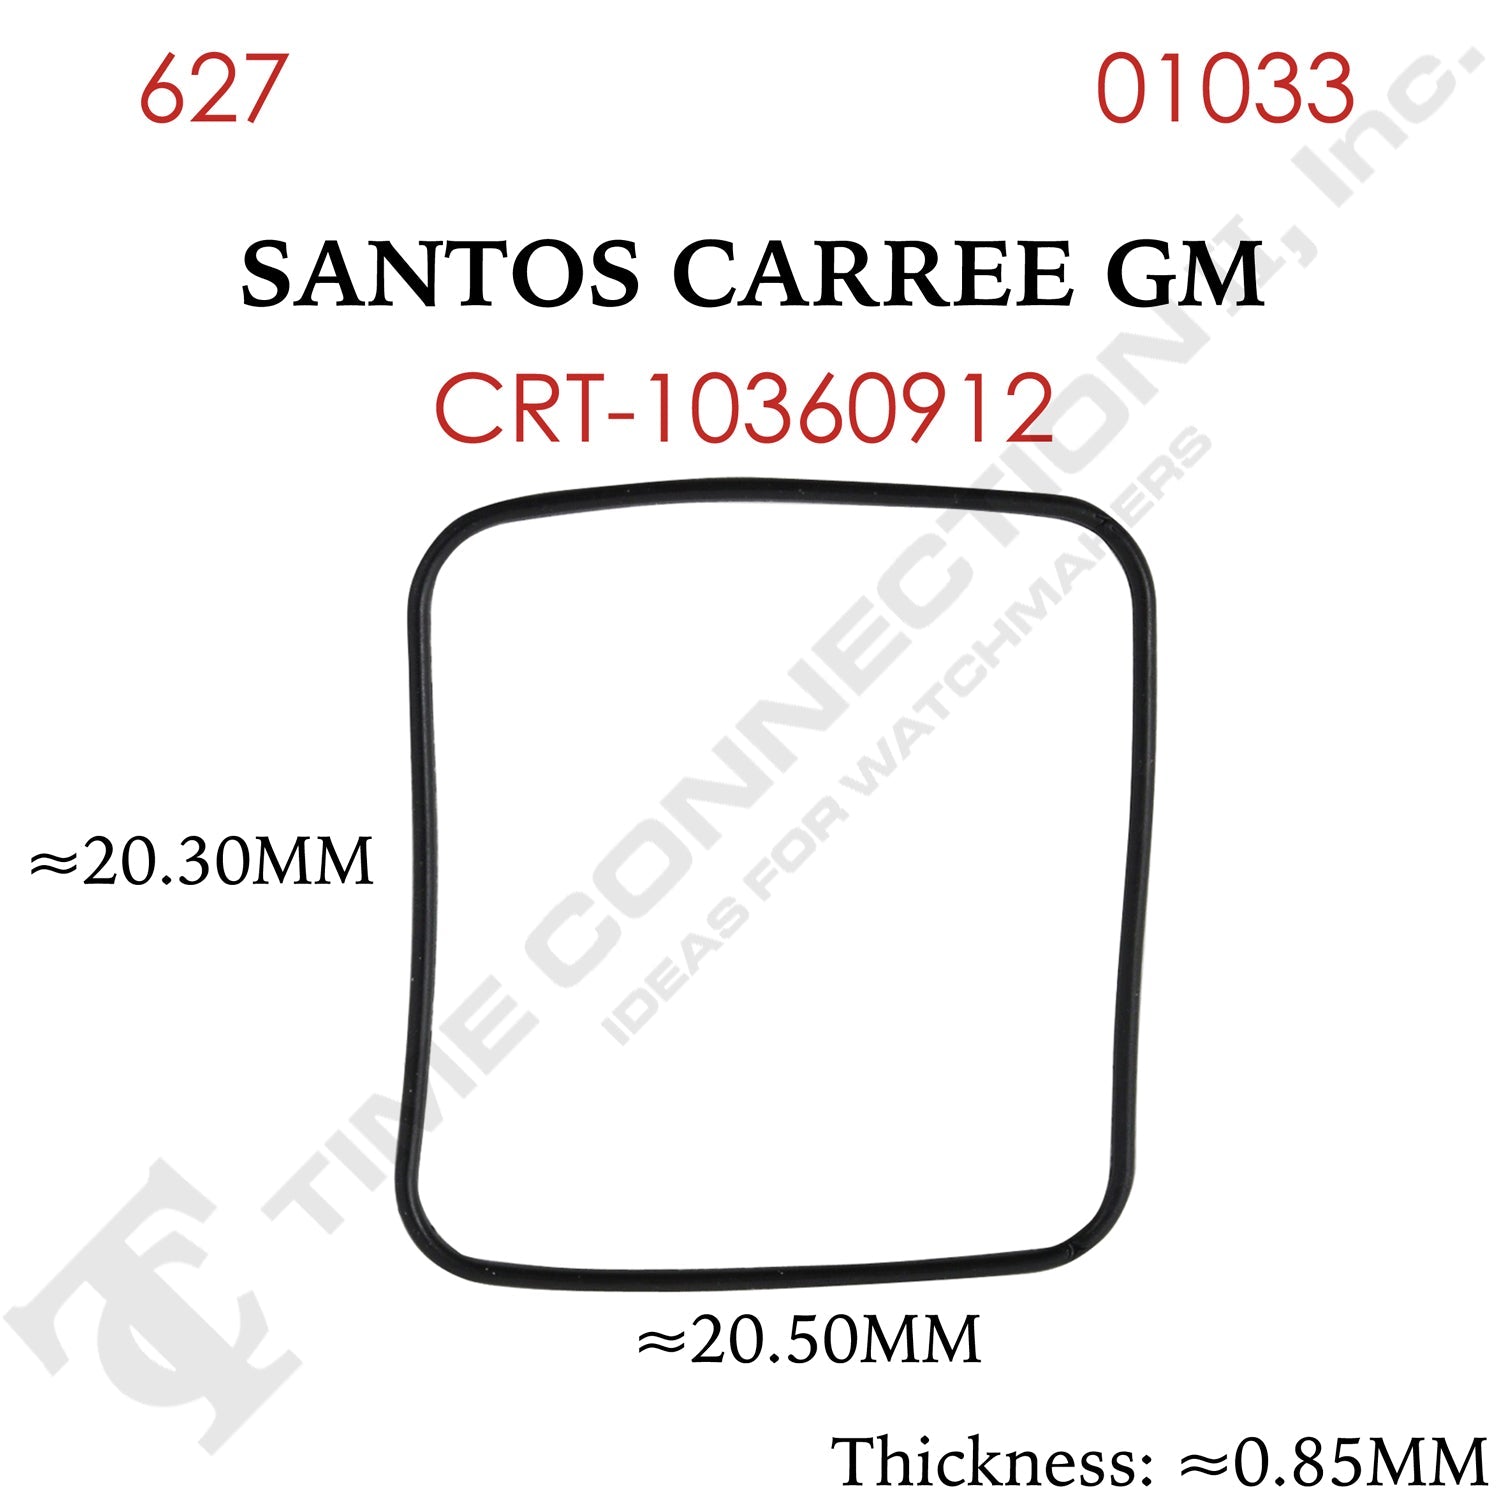 Original Cartier Square Case Back / Crystal Gaskets for Cartier Watches